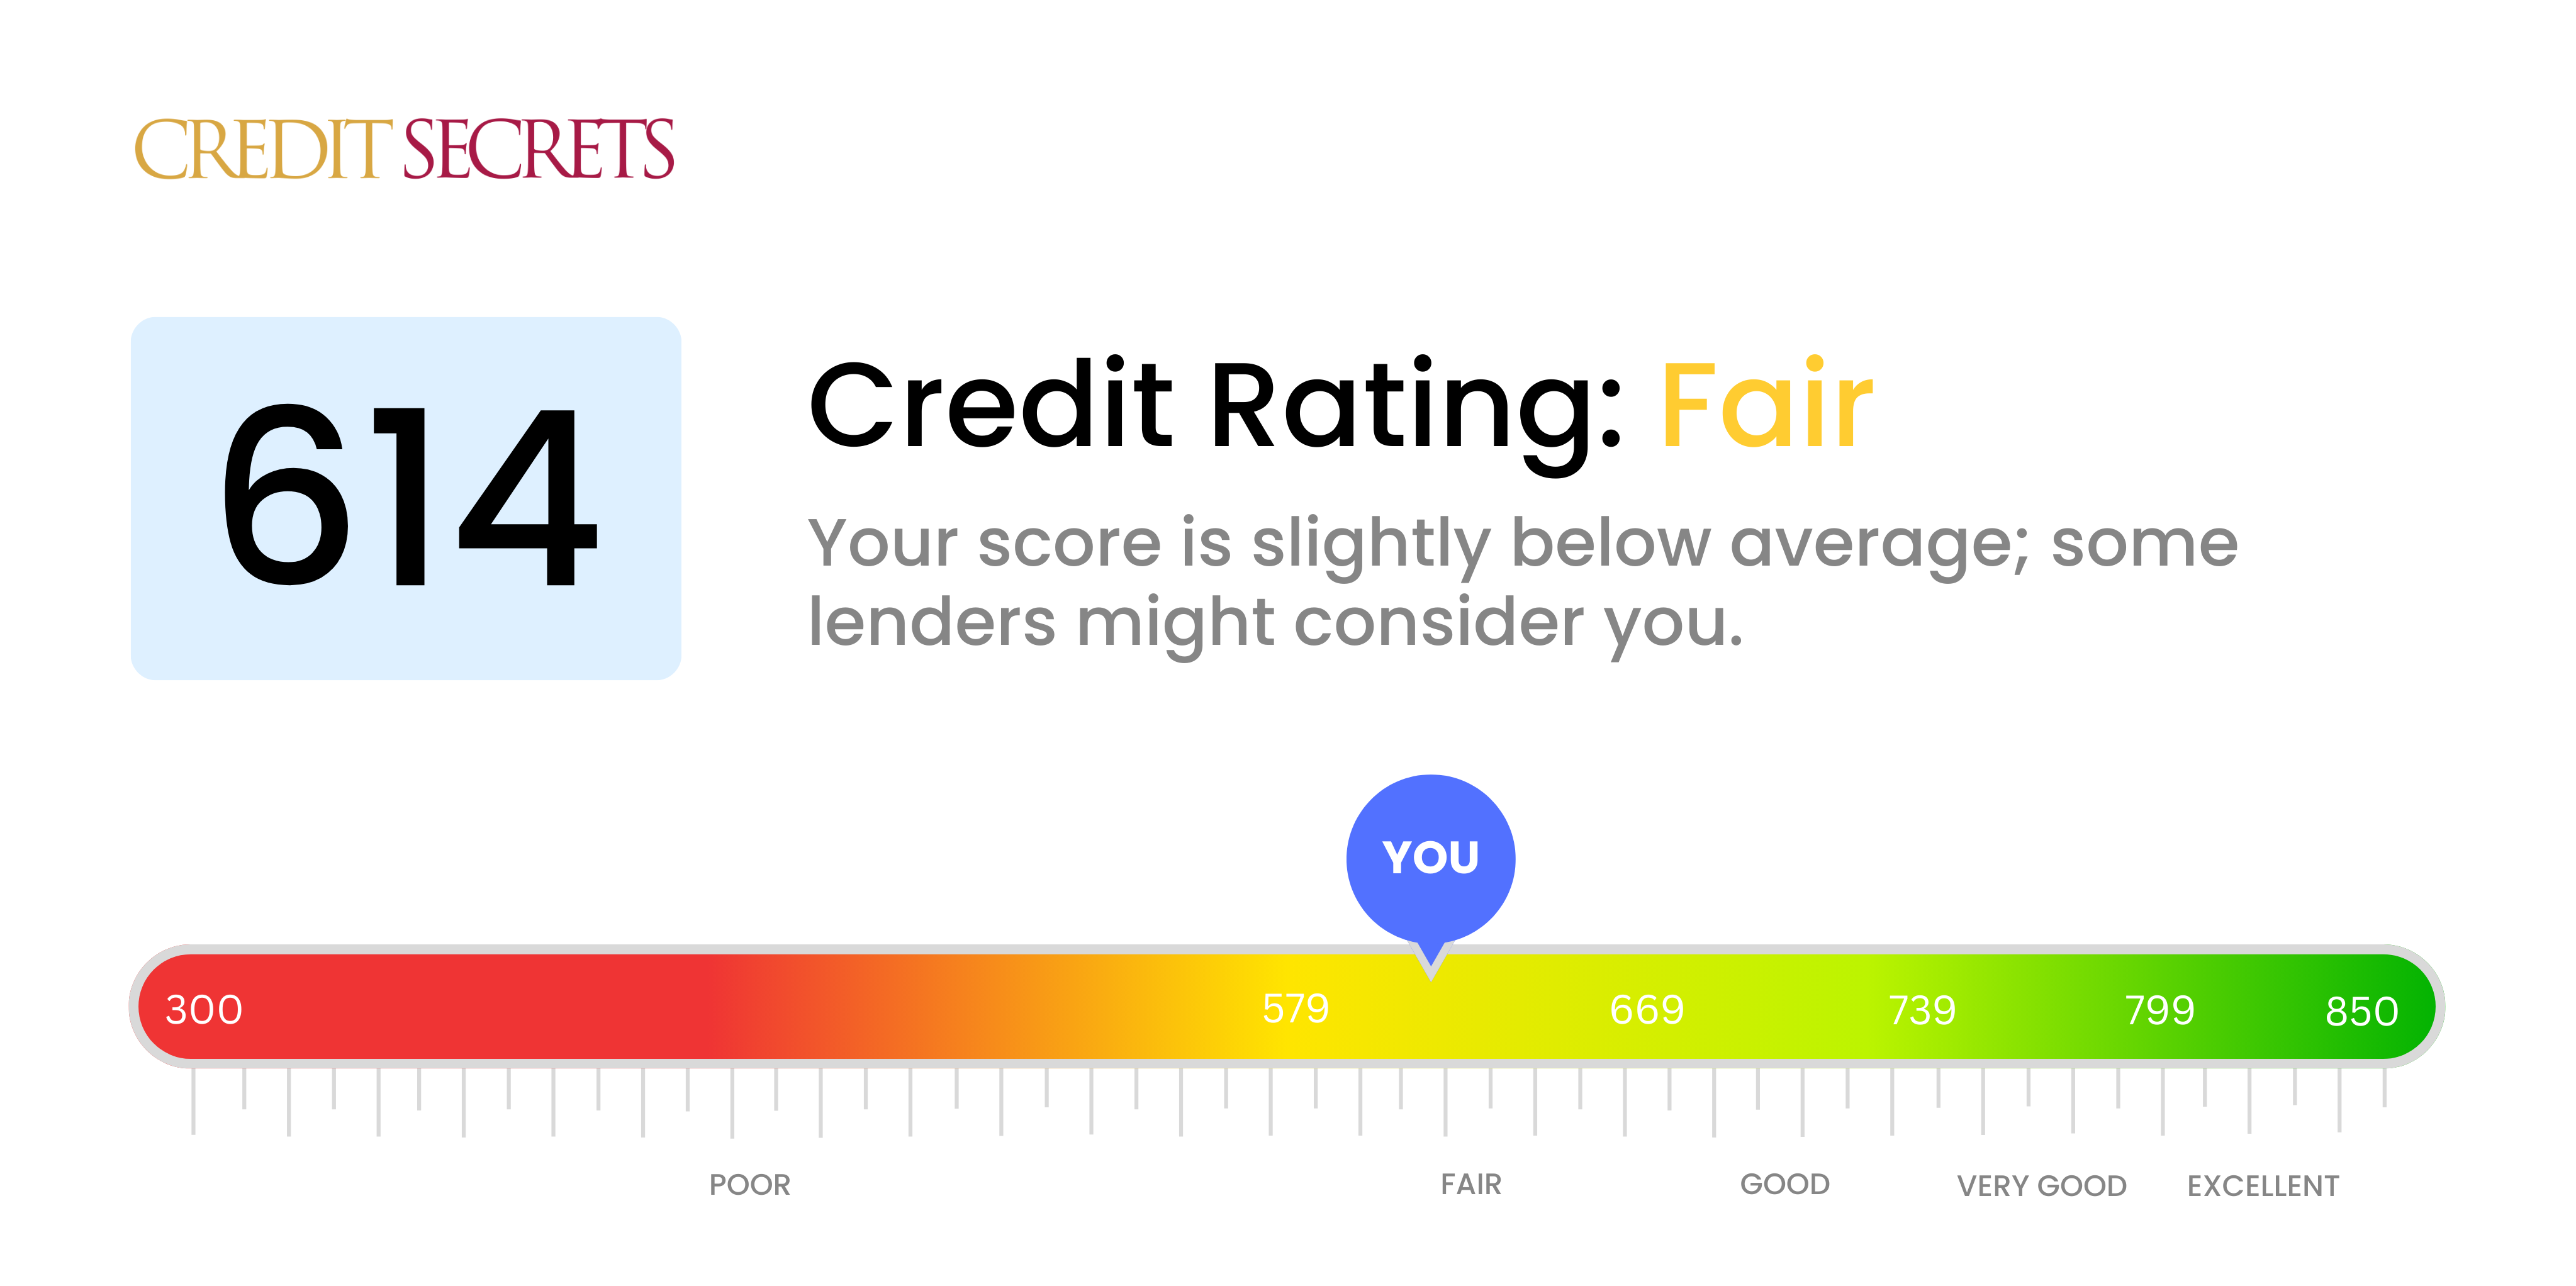 Is 614 a good credit score?